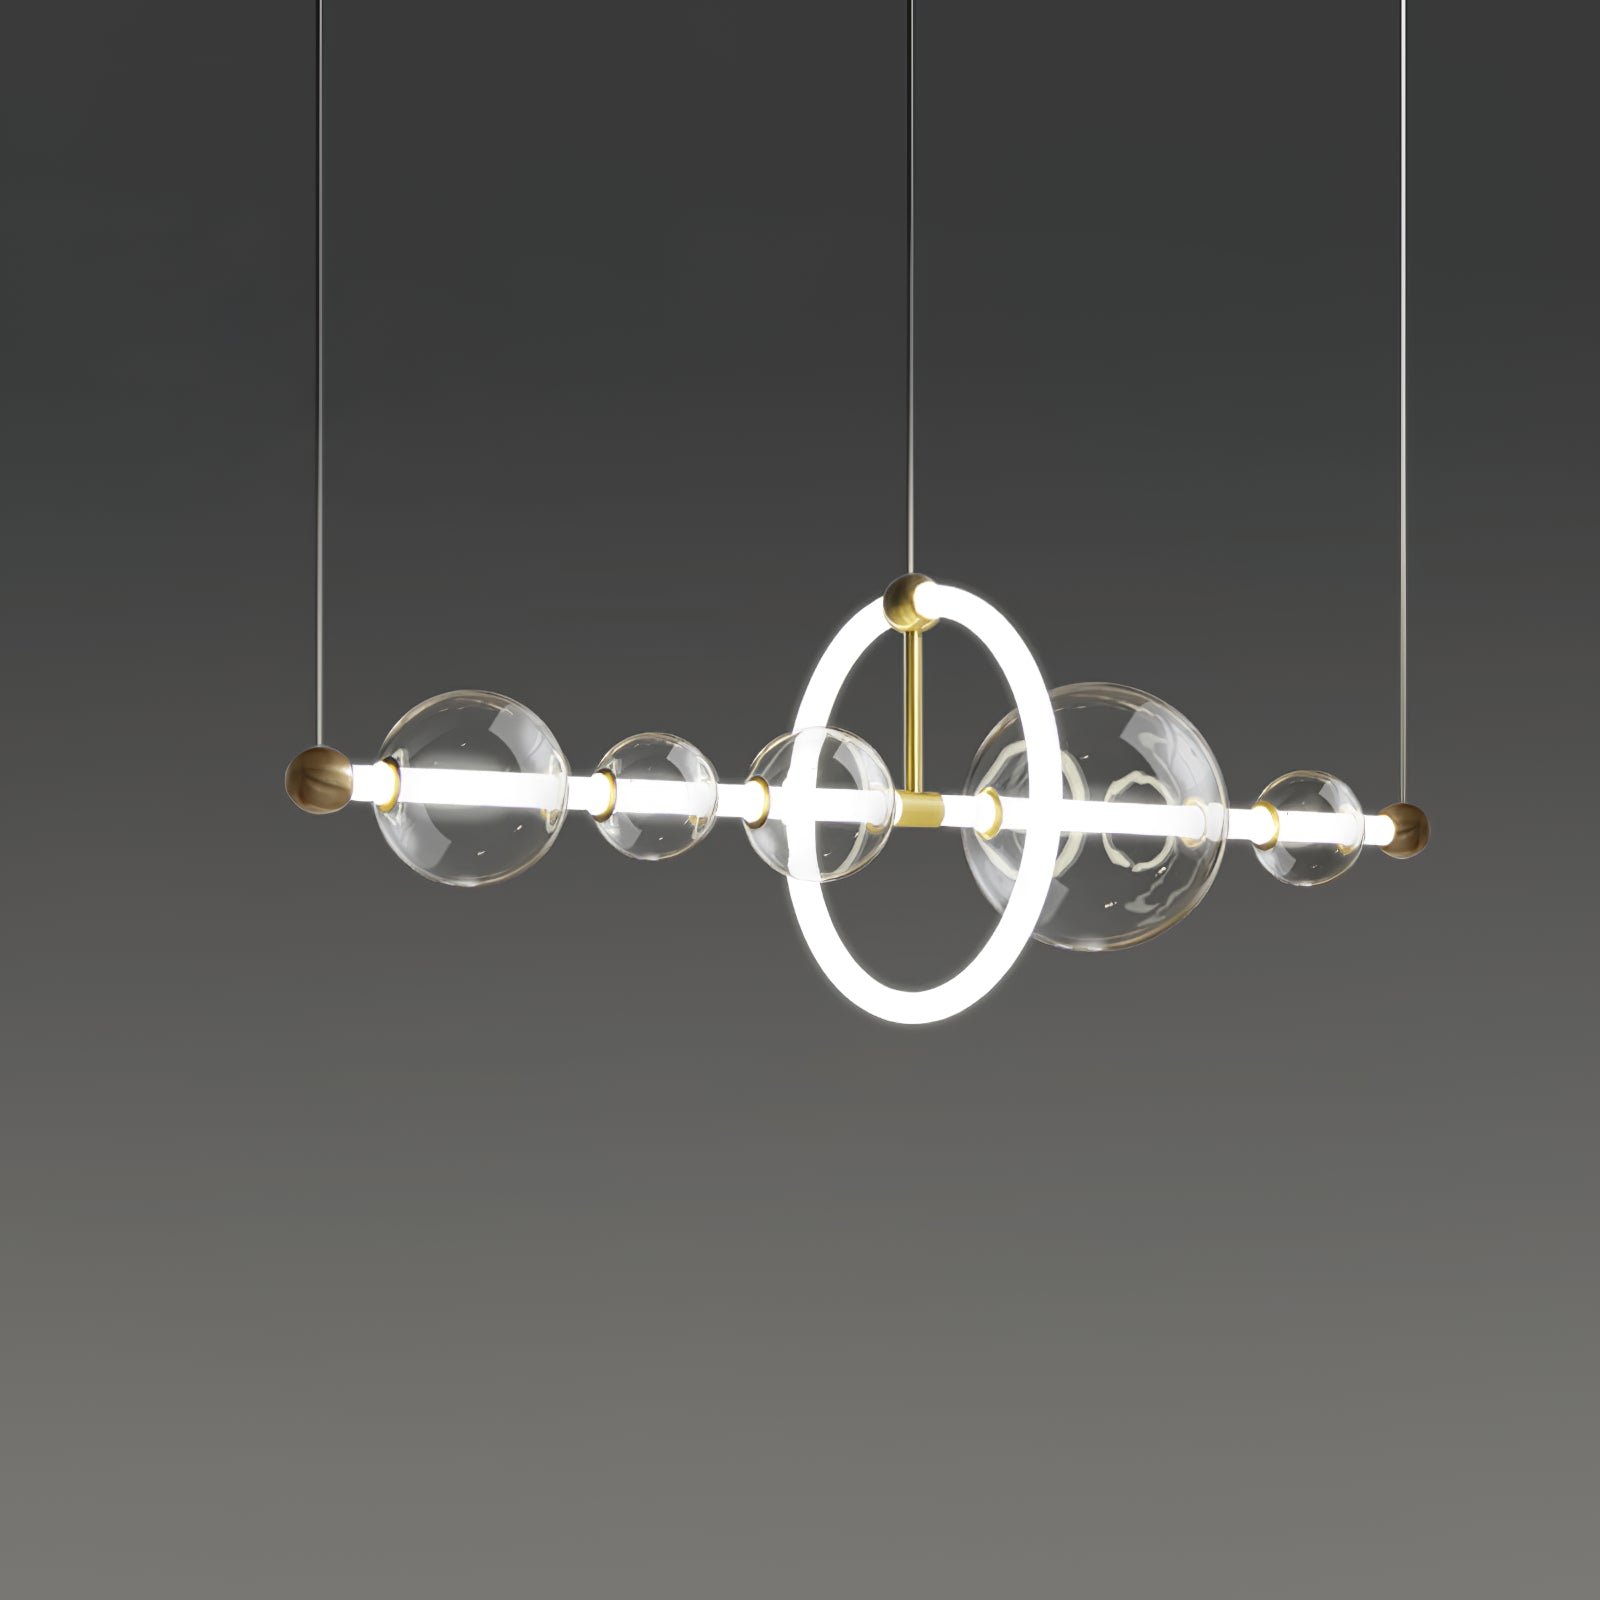 Gold and Clear Puppet Pendant Light, 90cm x 30cm x 30cm (35.4" x 11.8" x 11.8"), with Cool Light